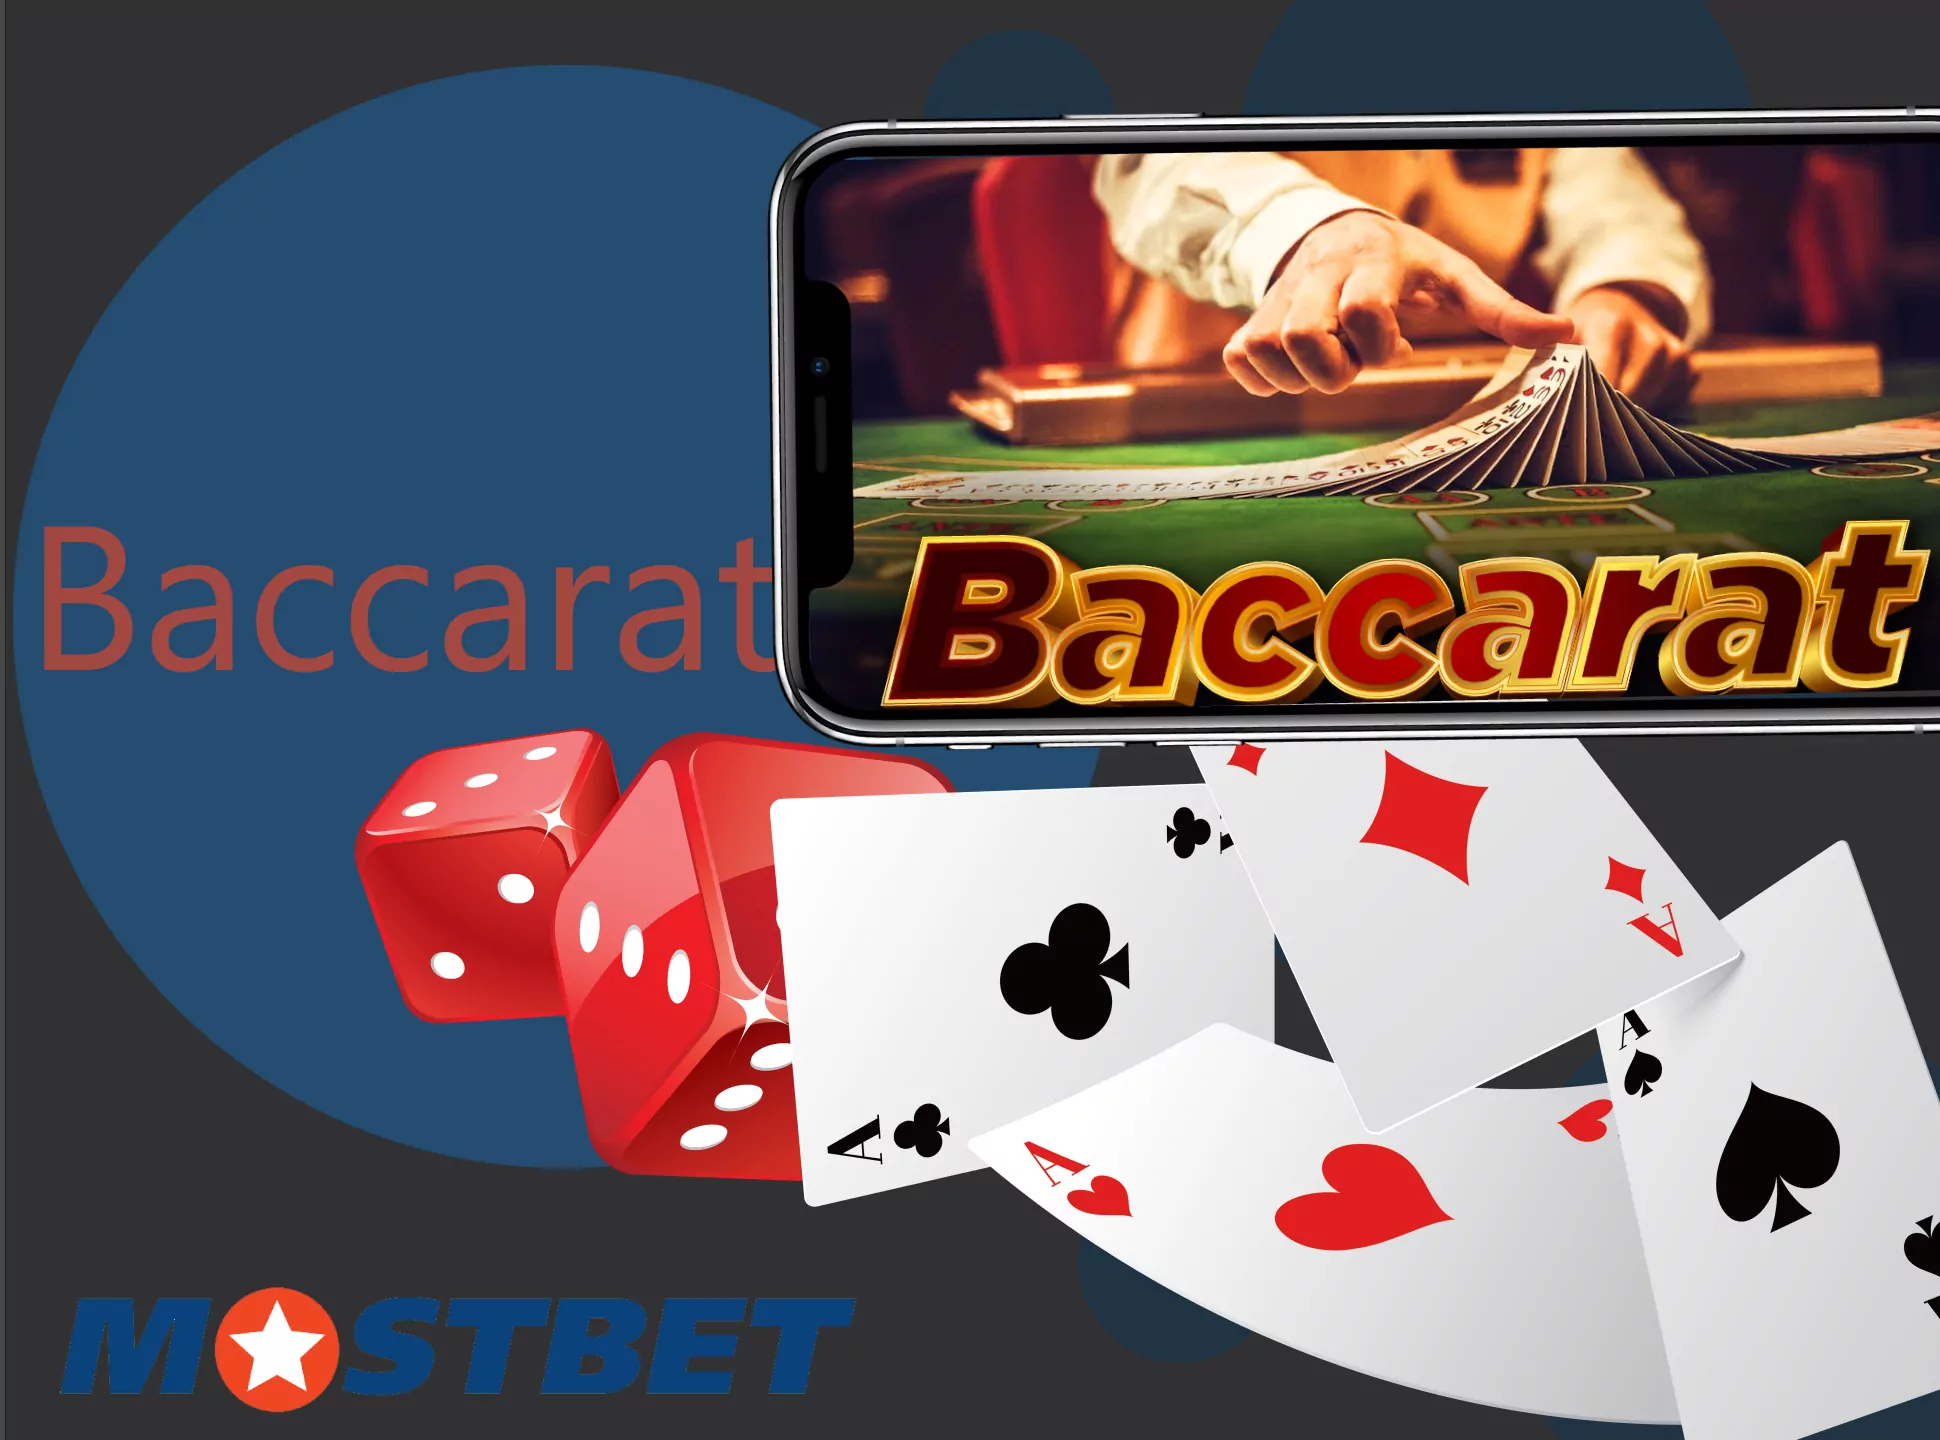 Baccarat games can be played in the live section of the Mostbet app.